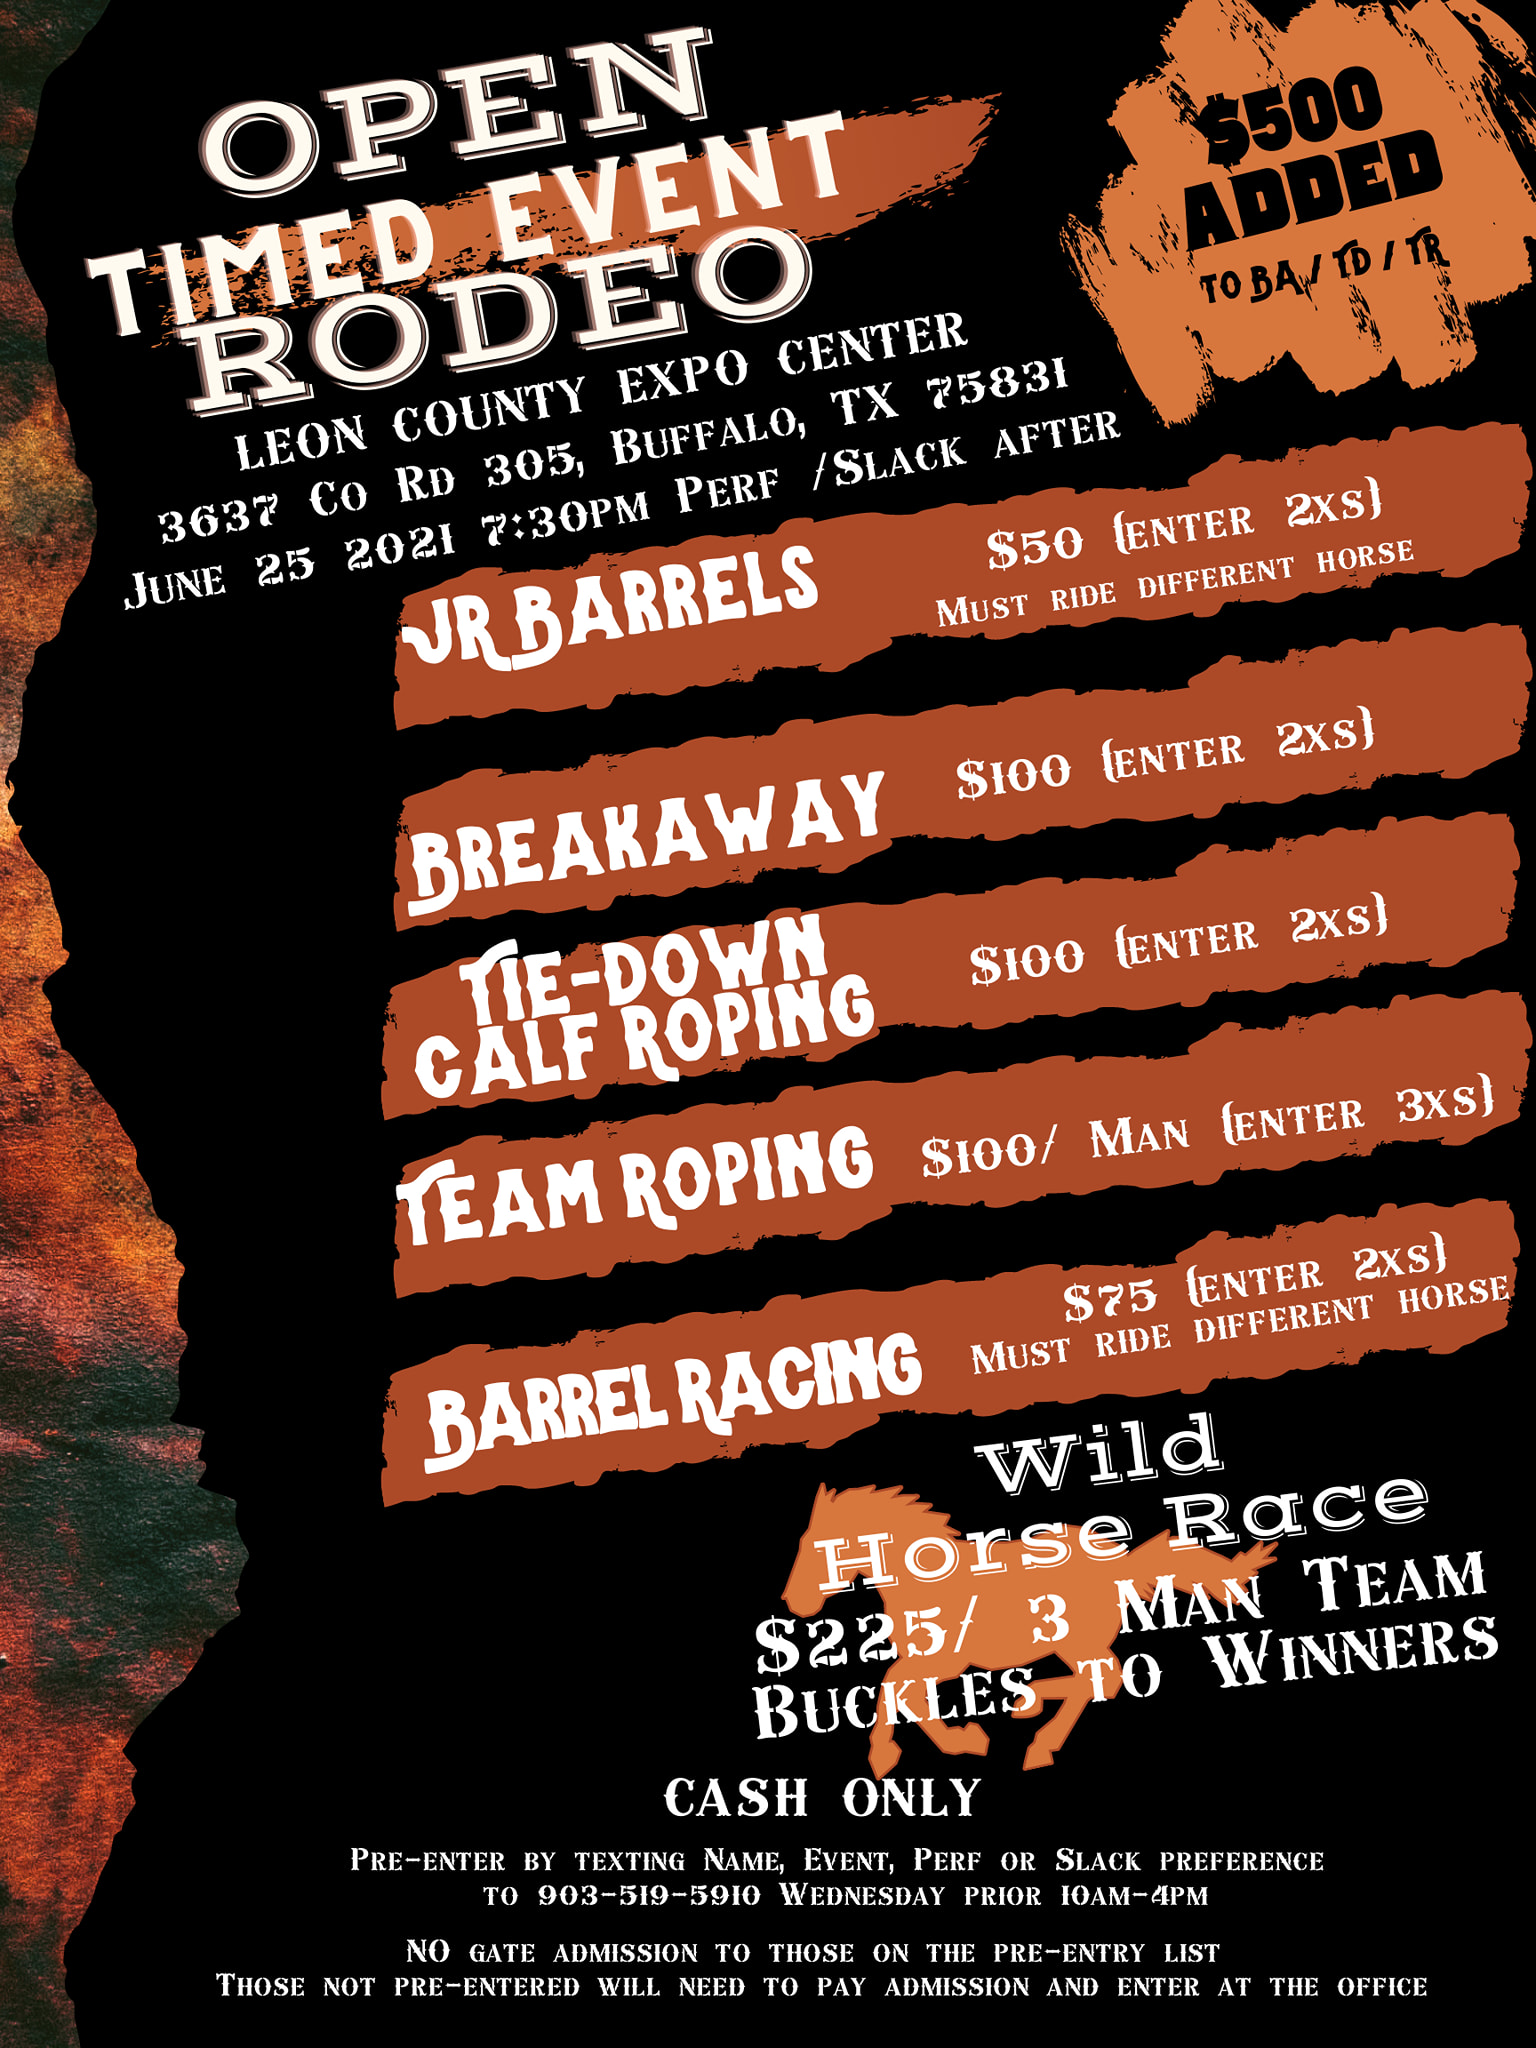 Open Timed Event Rodeo 